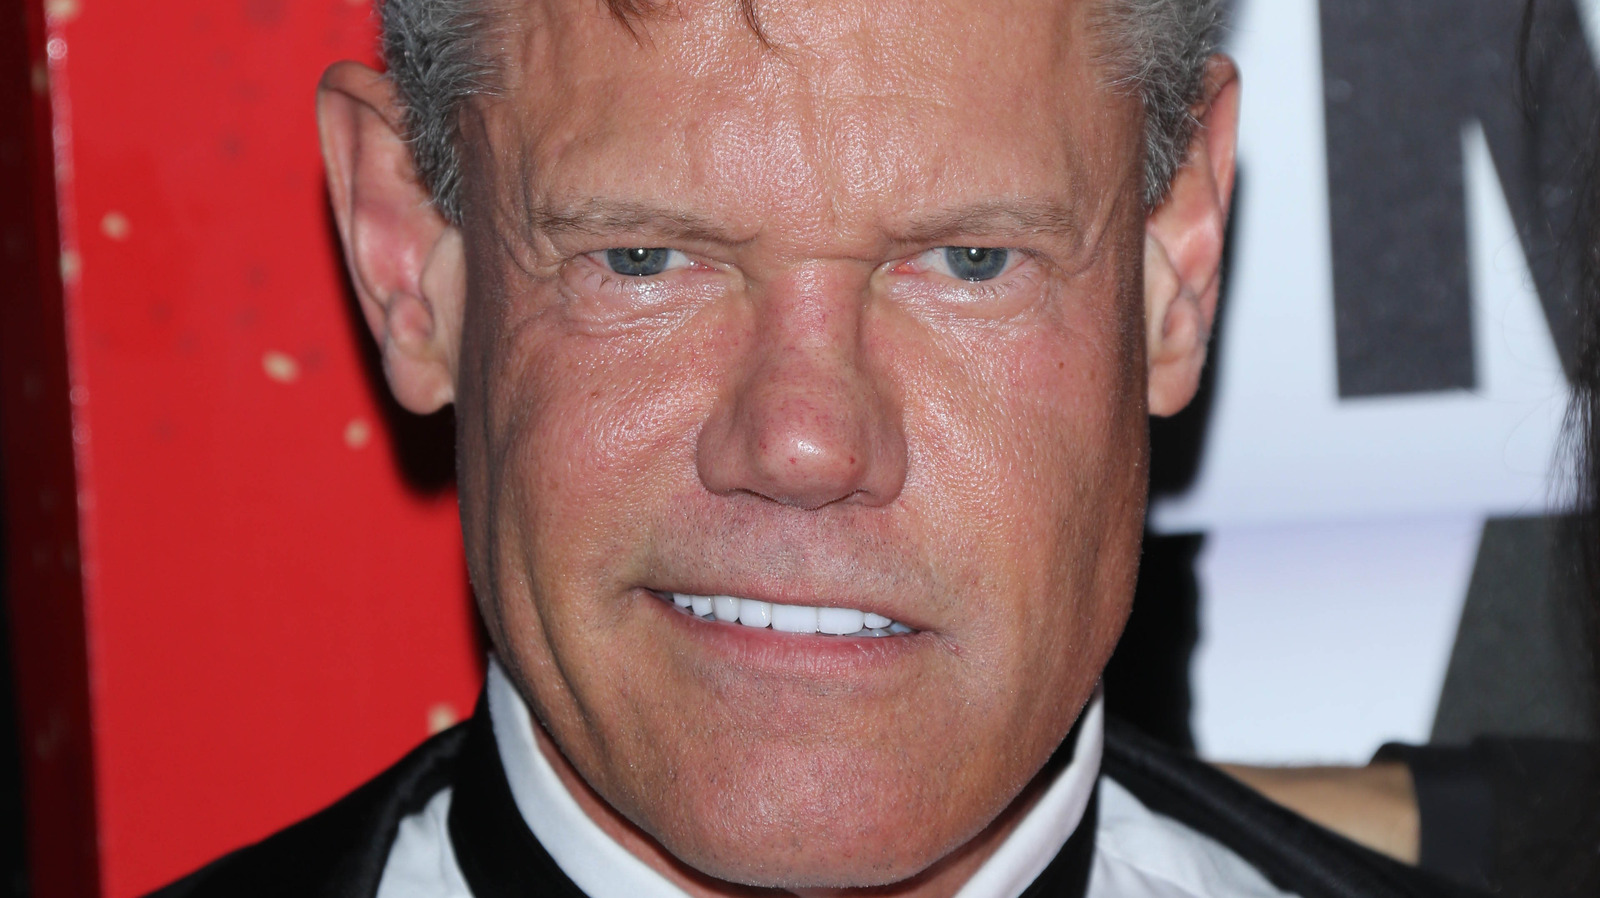 The Truth About Randy Travis' Troubled Past SerchUp AI